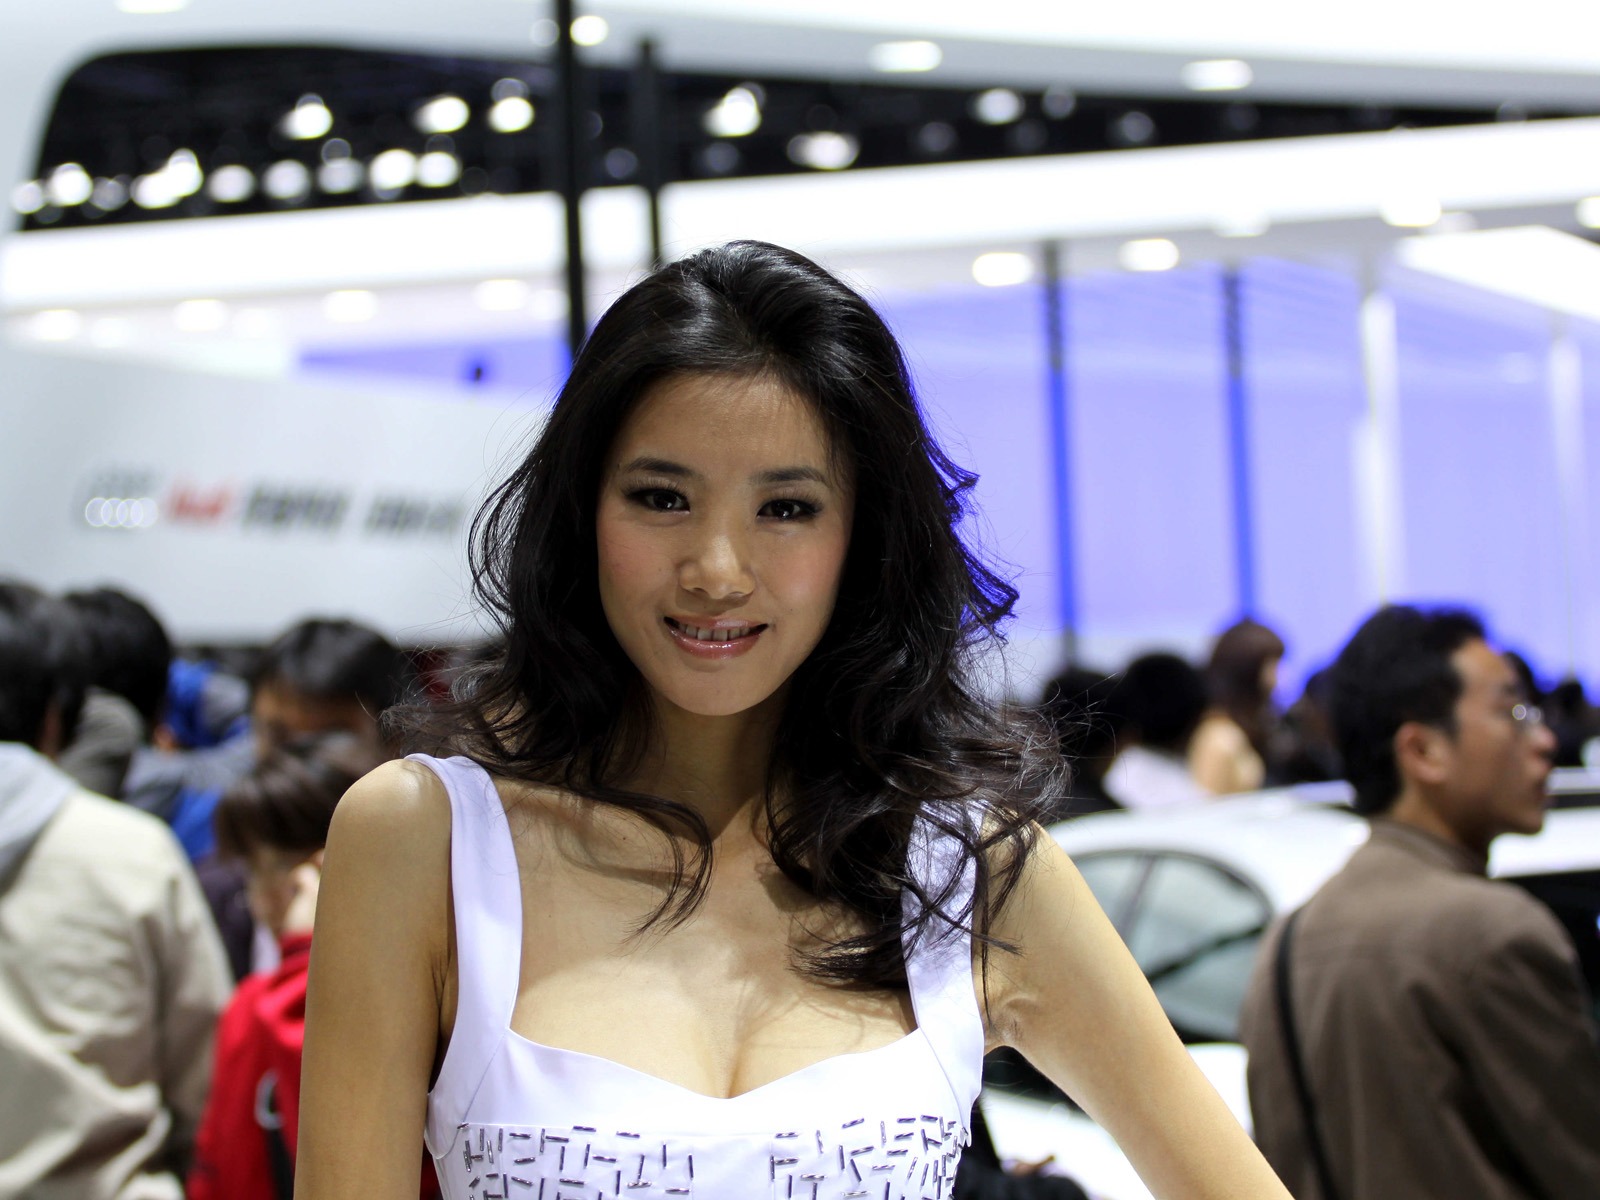 2010 Beijing Auto Show car models Collection (2) #4 - 1600x1200